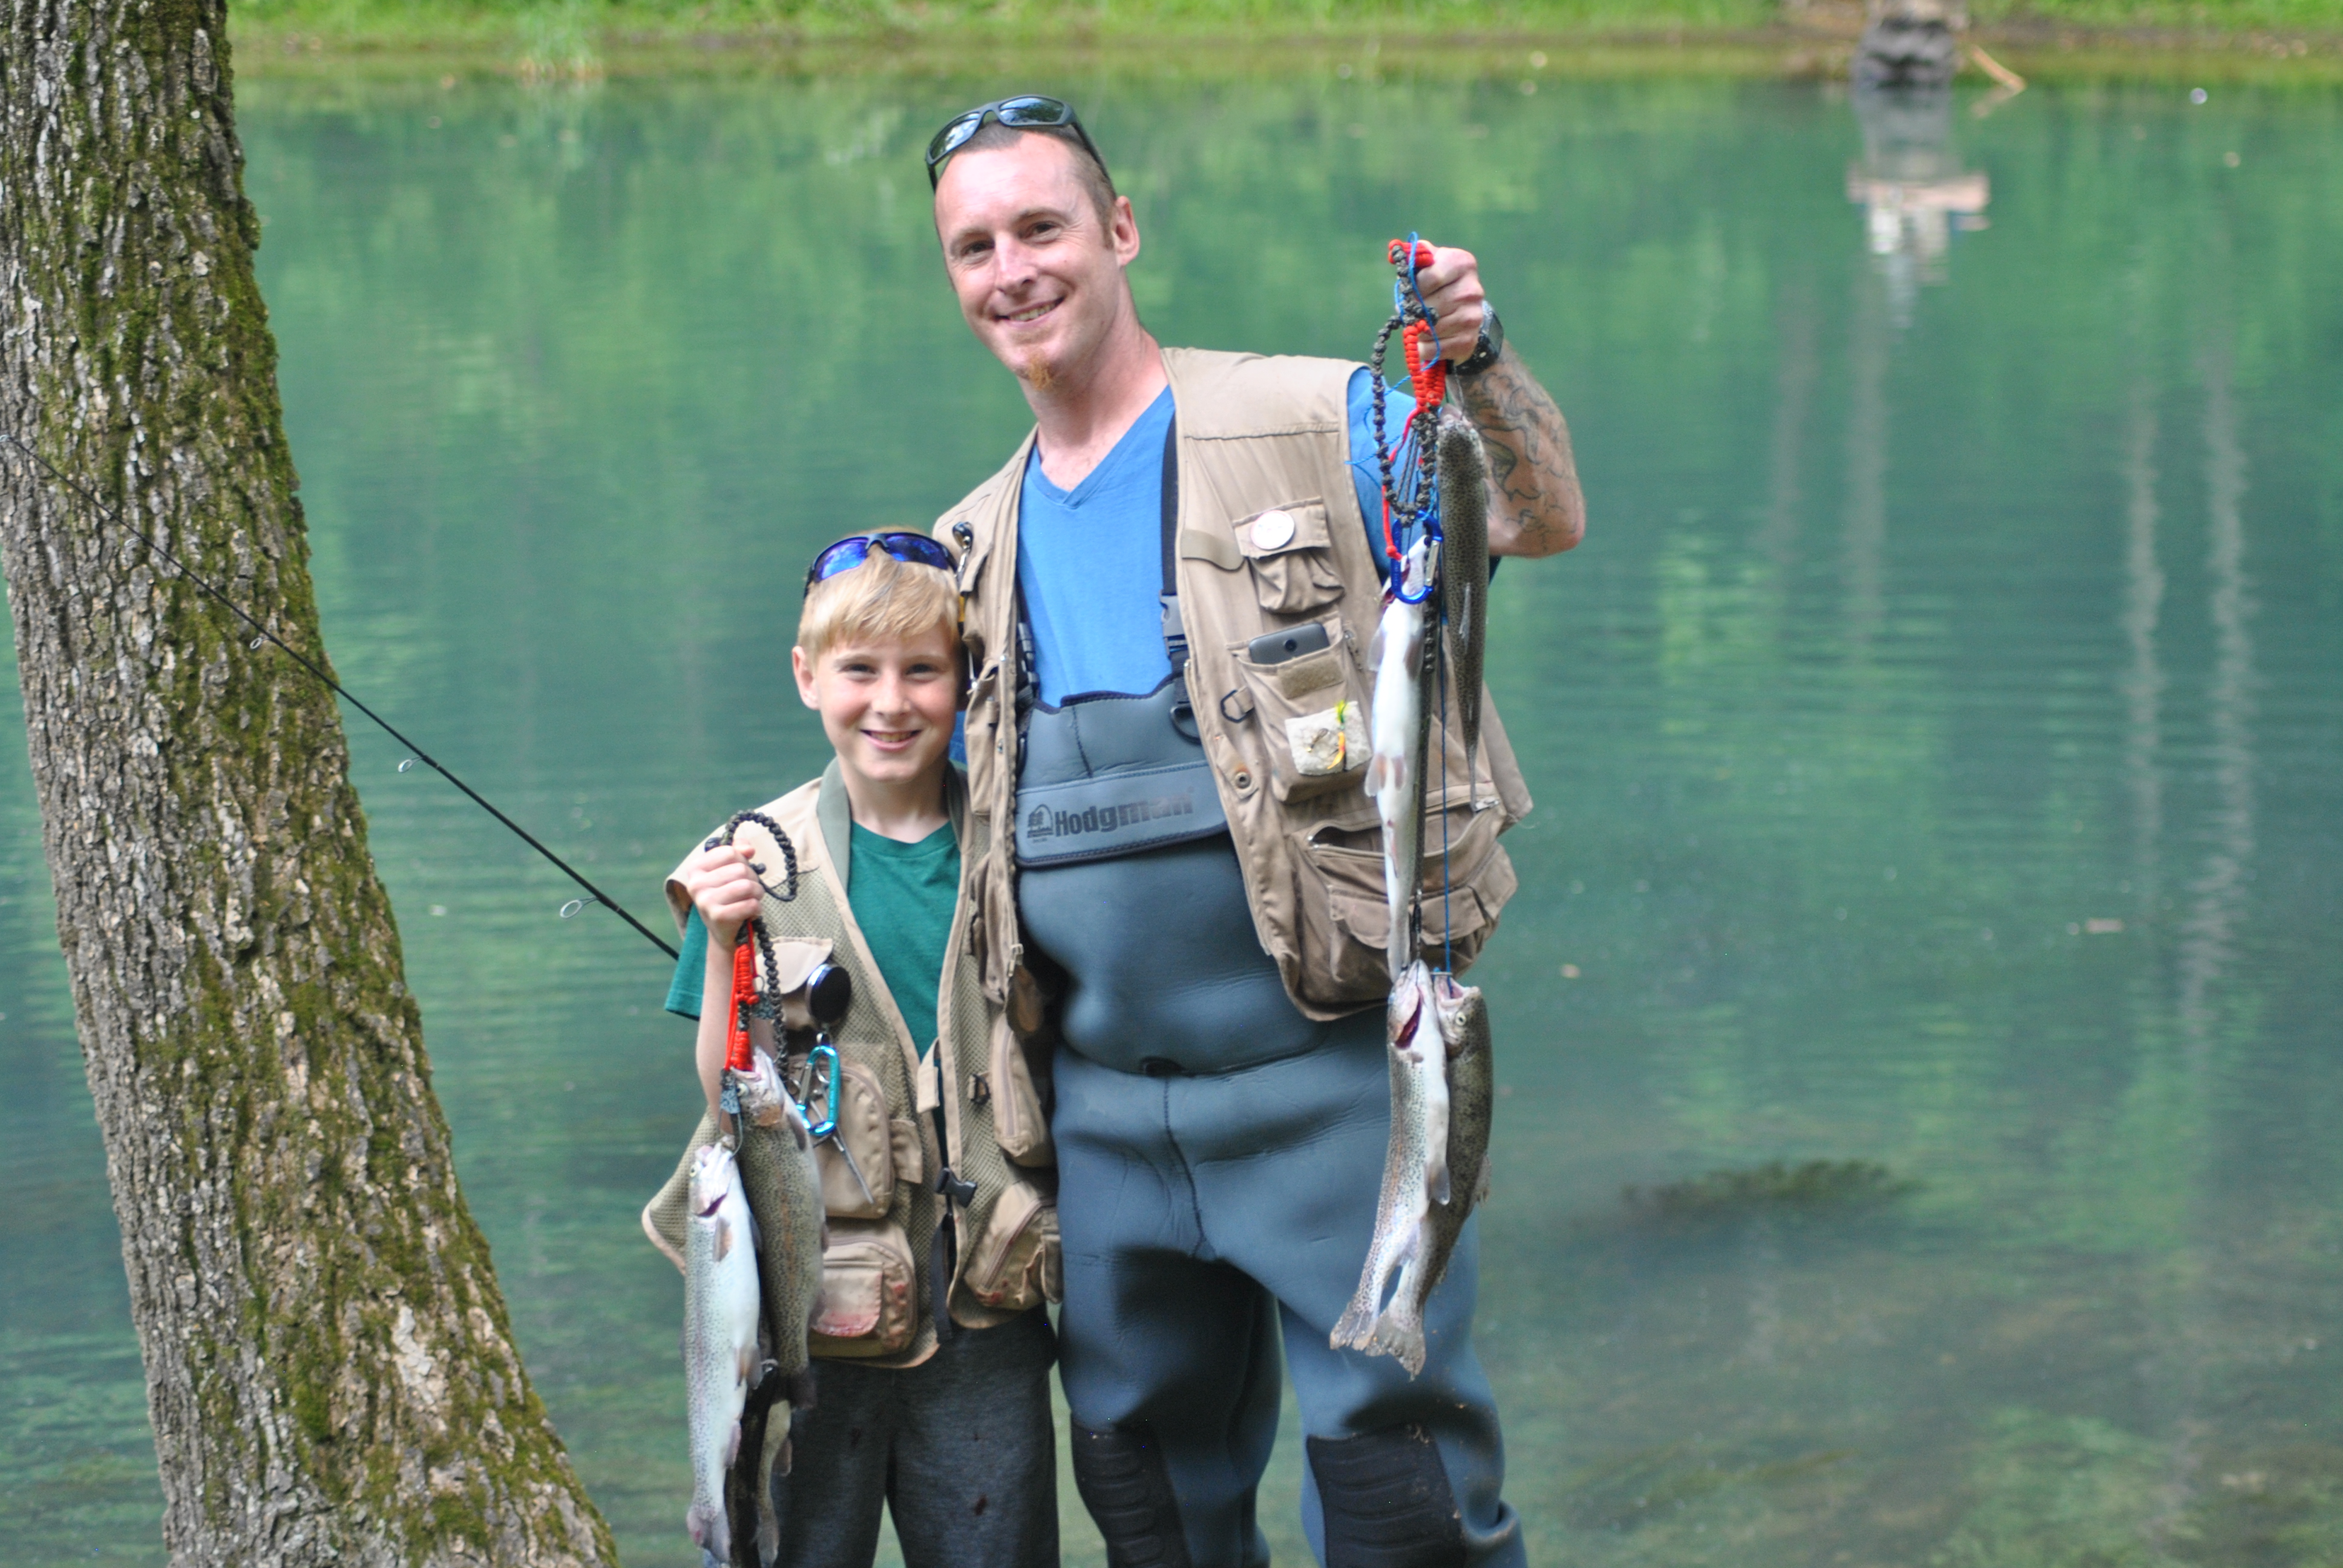 Trout Fishing at Maramec Spring Park is managed by the Missouri Department of Conservation